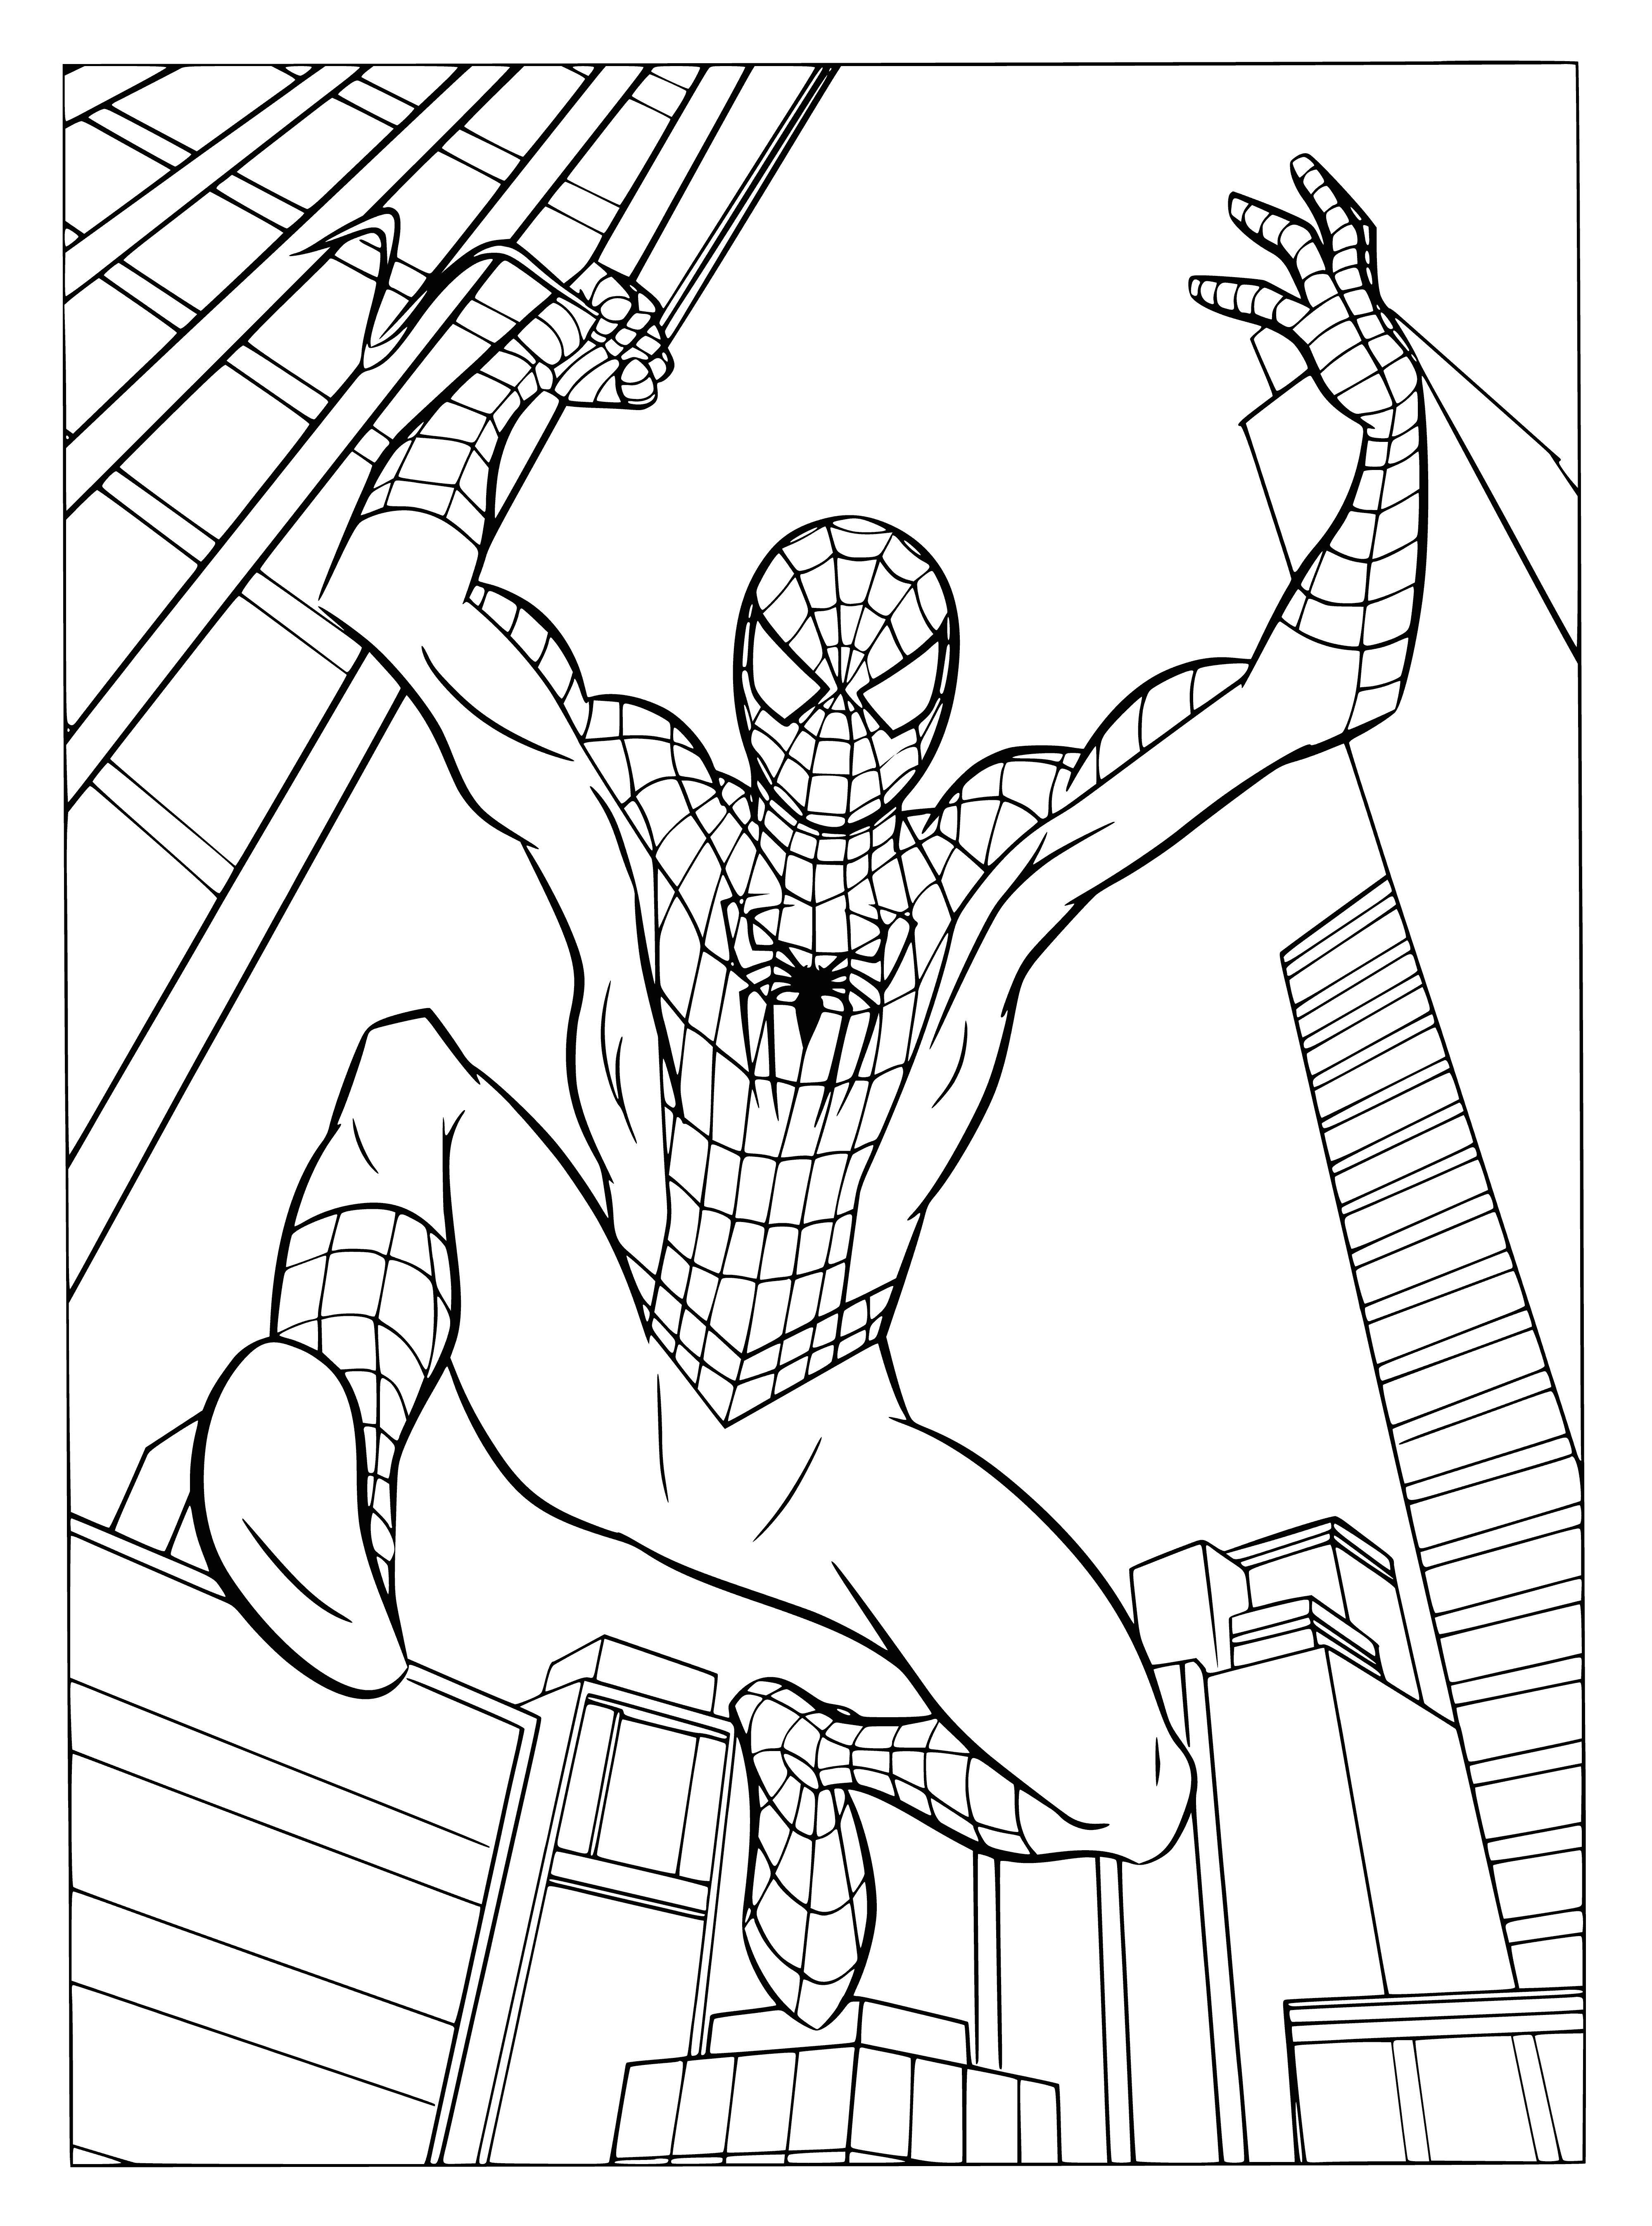 coloring page: Man in spider costume stands on building, with blue and red suit, black mask, and spider on chest. #superhero